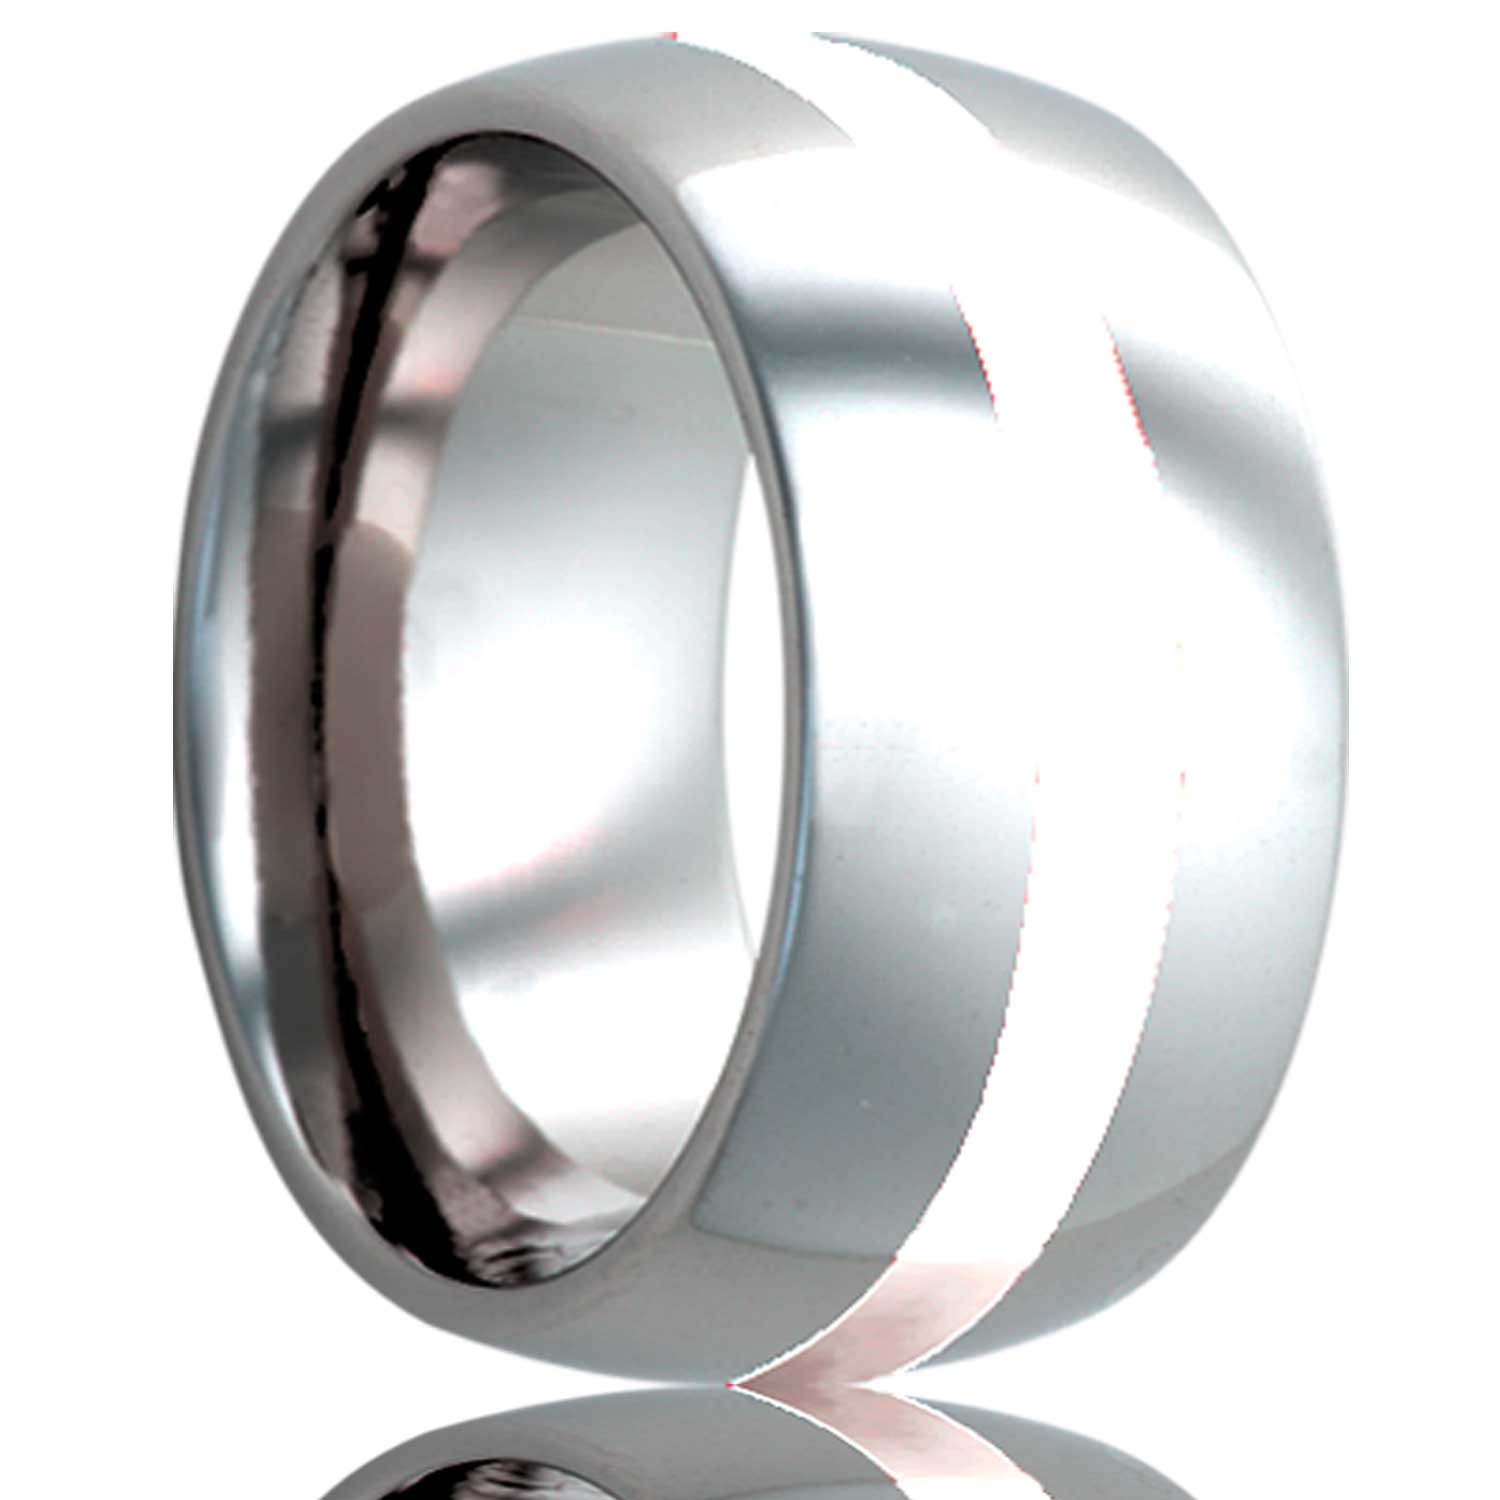 A argentium silver inlay domed cobalt wedding band displayed on a neutral white background.